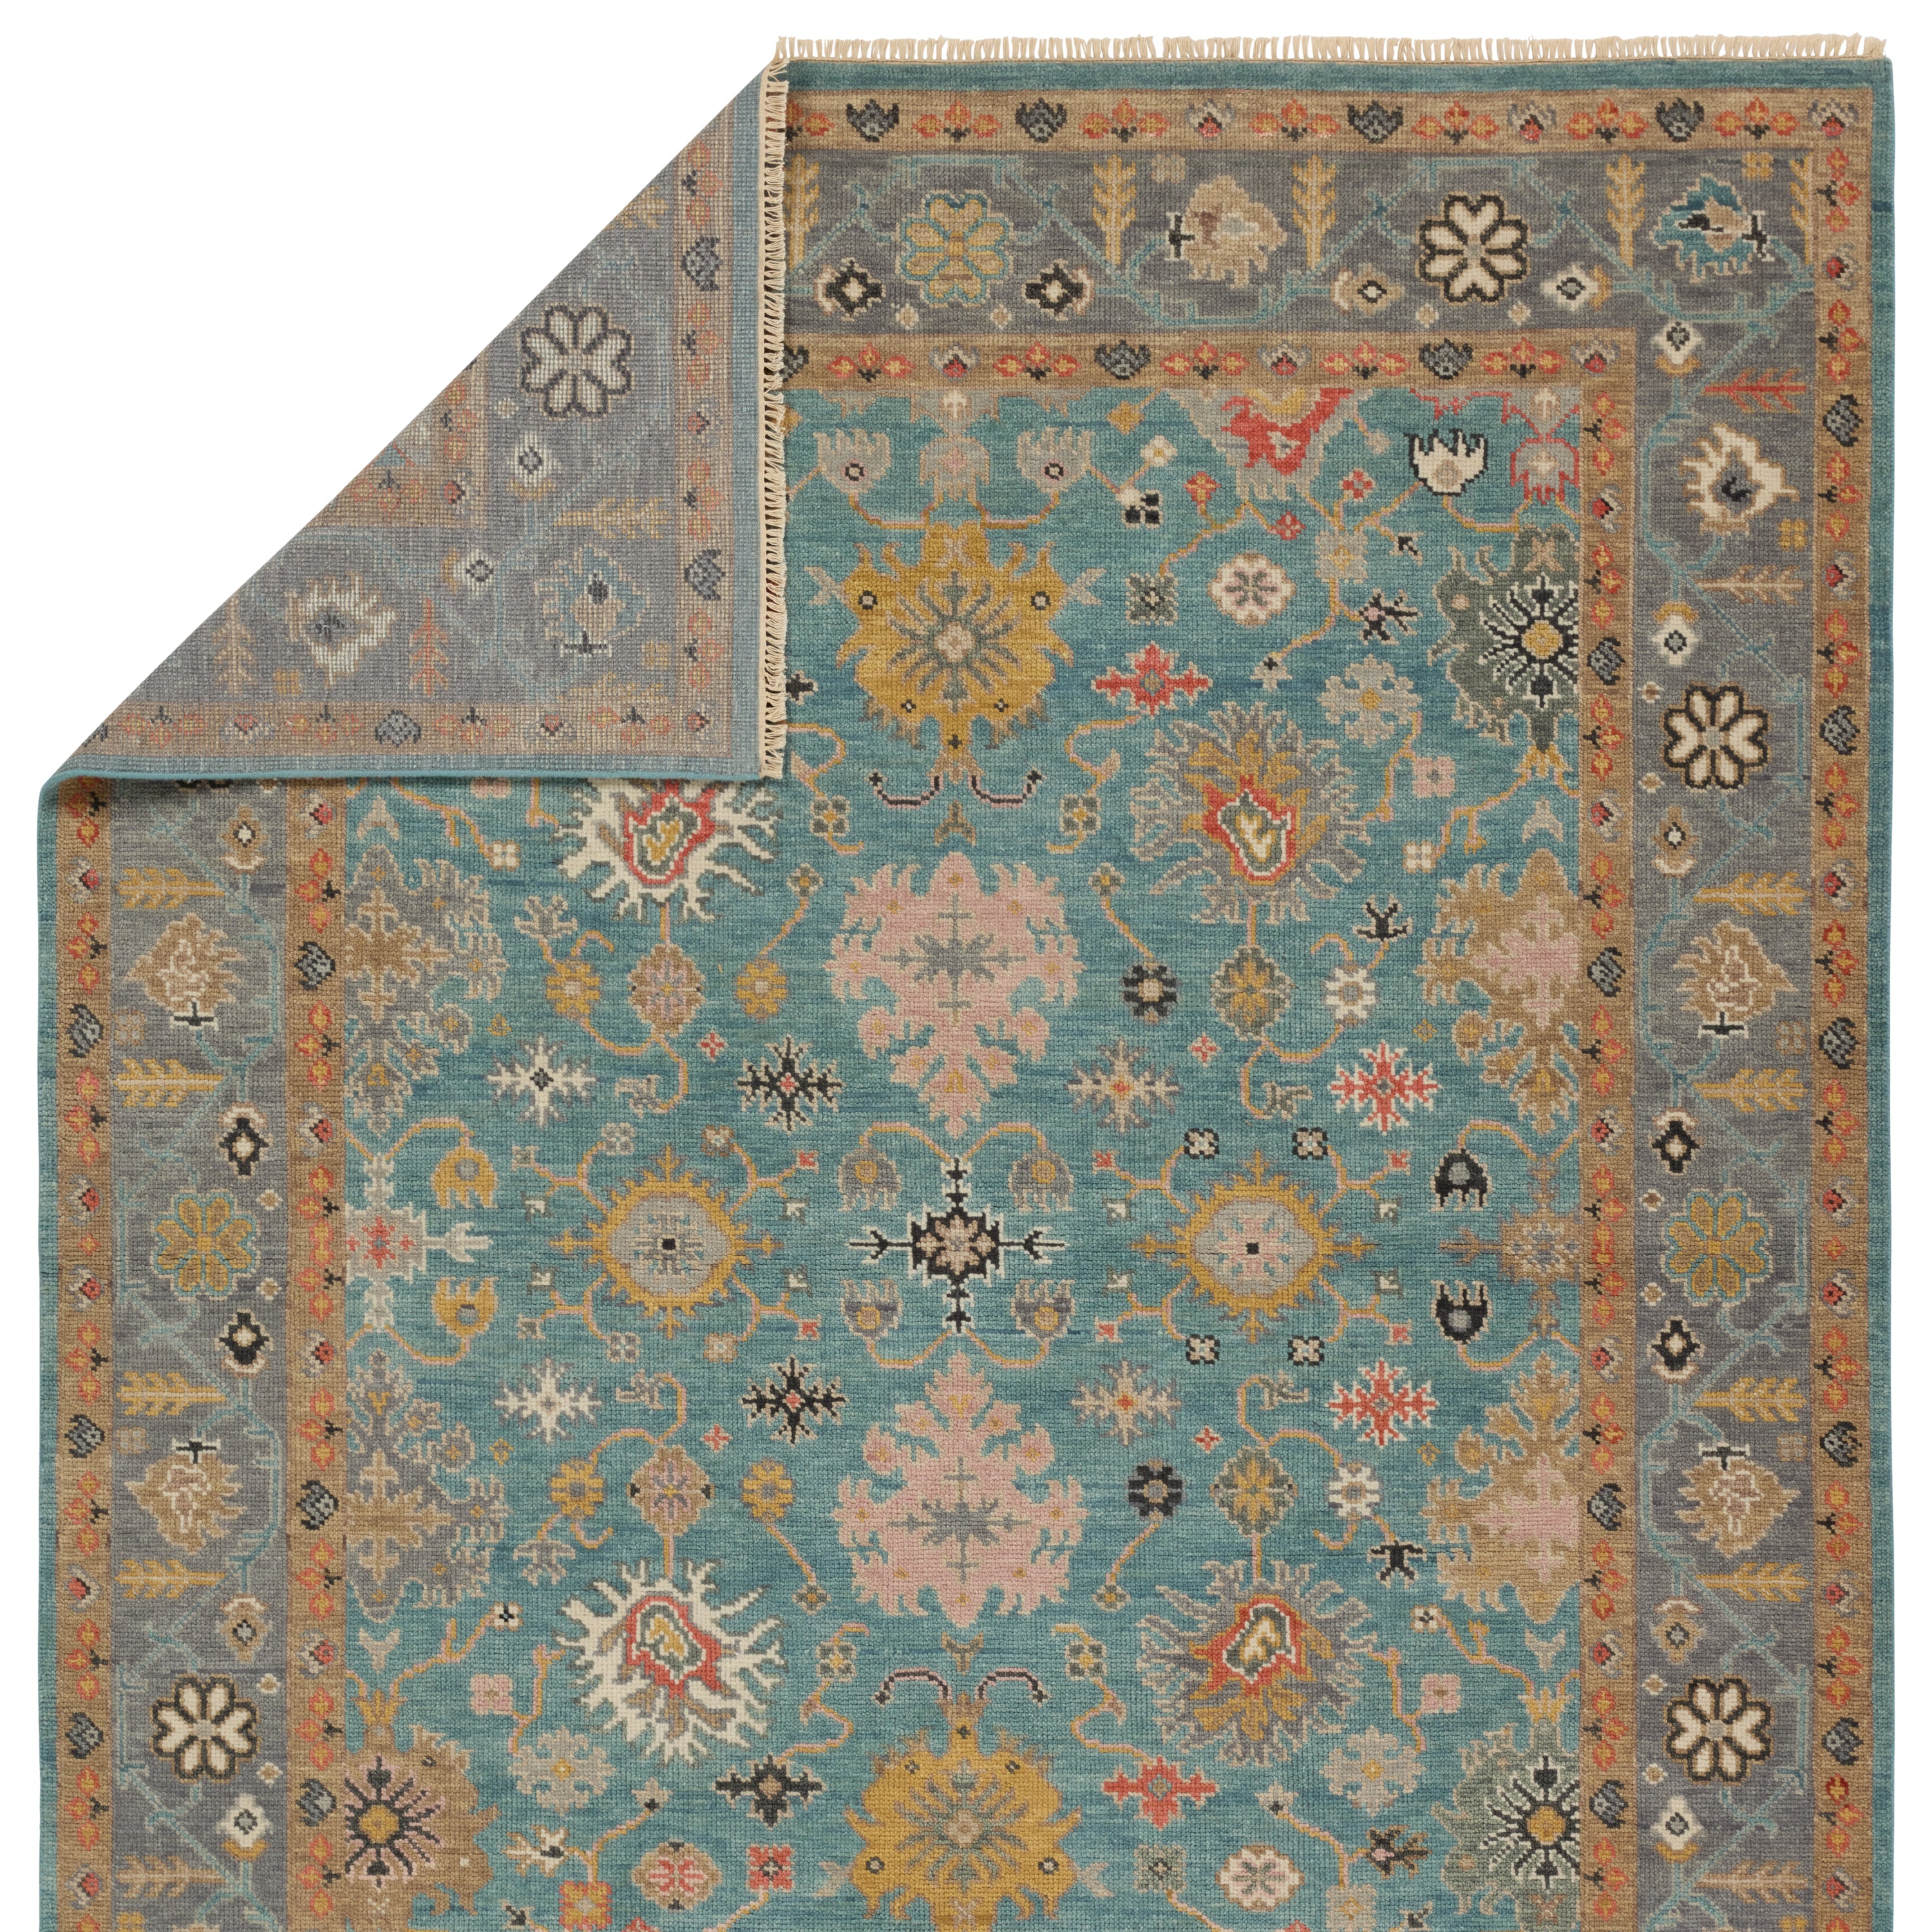 The updated traditional Everly collection features Oushak-inspired designs in whimsical color palettes. The Aloft design features a lively colorway of blue, pink, yellow, navy, cream, peach, and taupe. This hand-knotted wool rug anchors living spaces with a fresh take on vintage style. The low, easy-care pile delights in both high and low traffic areas of the home.  Amethyst Home provides interior design, new construction, custom furniture, and area rugs in the Portland metro area.